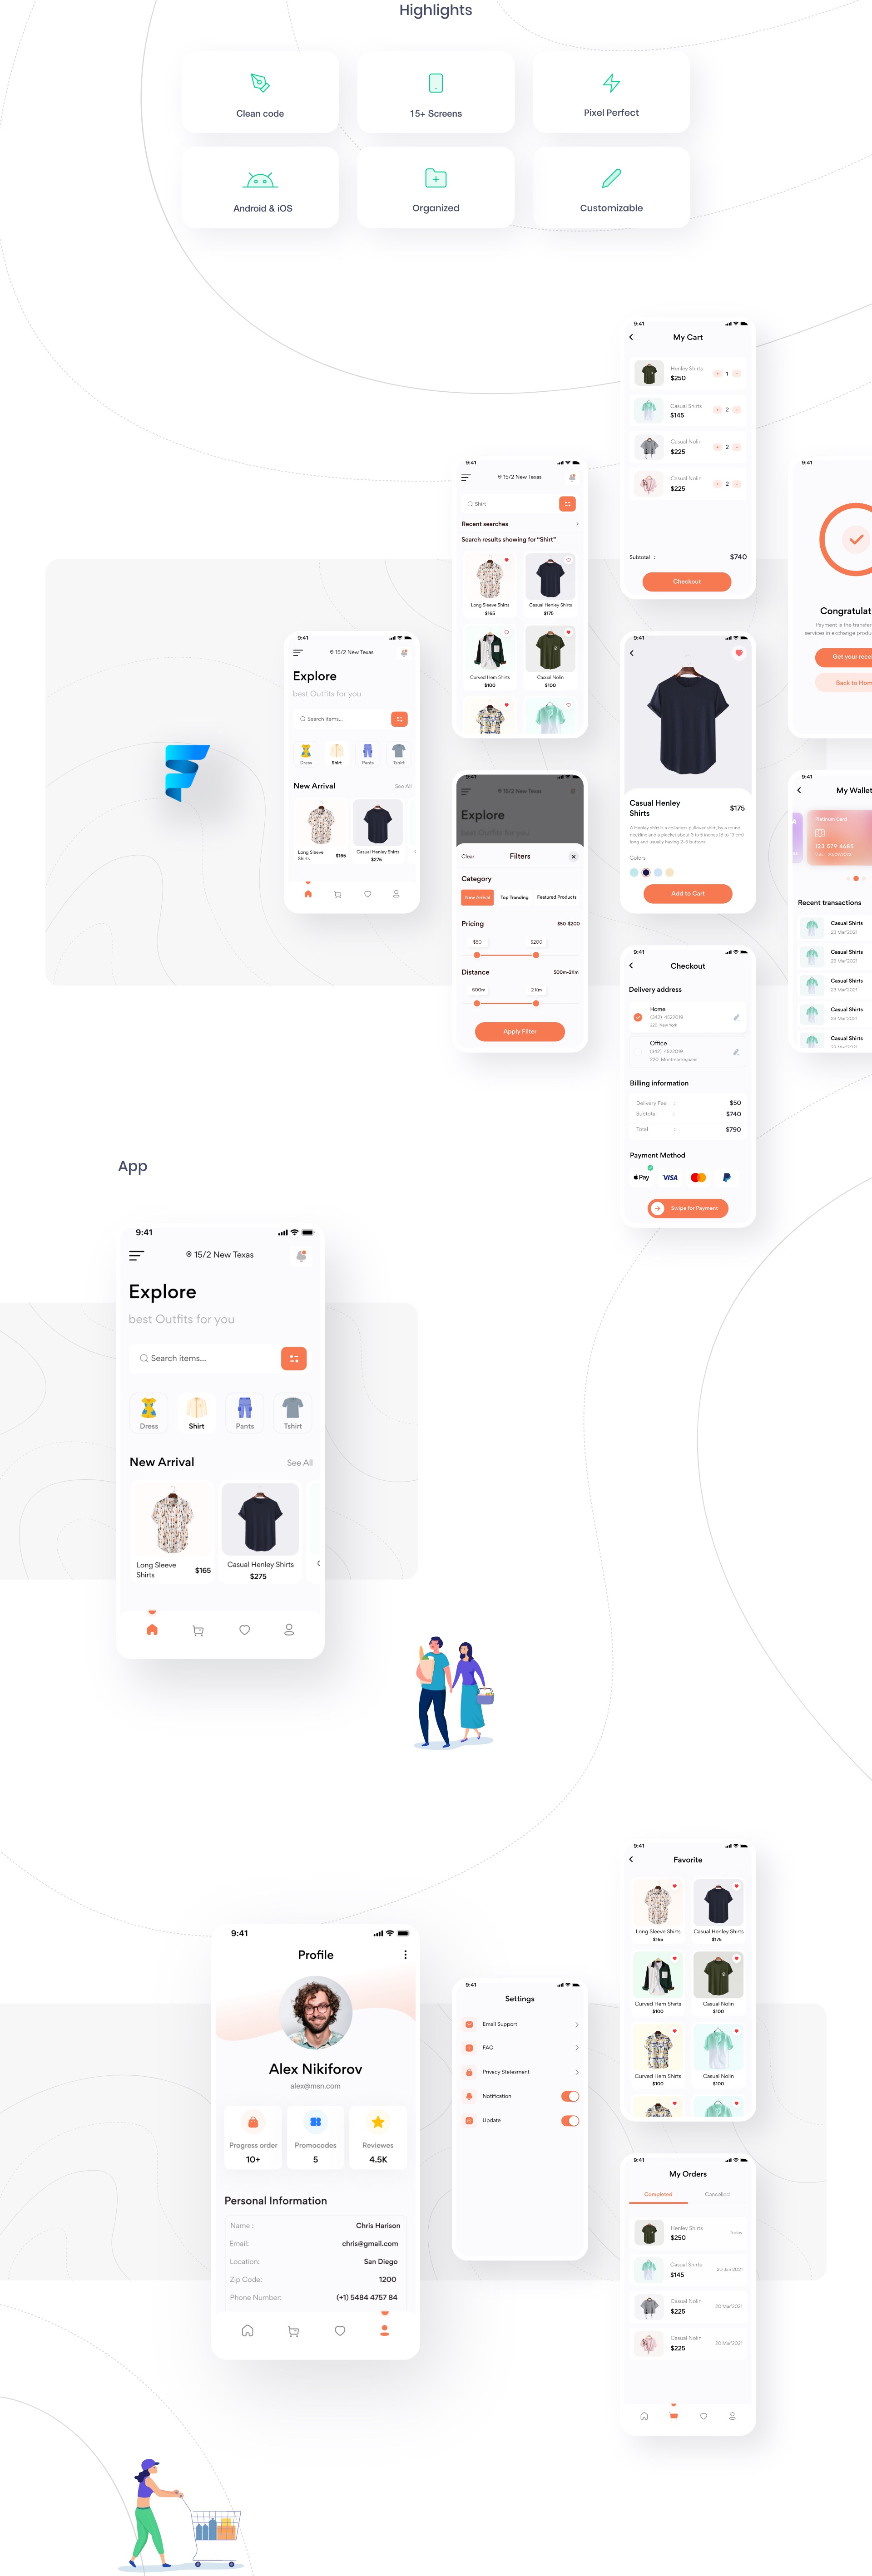 Flutter Shop UI Kit Comes With More Than 15 Screens